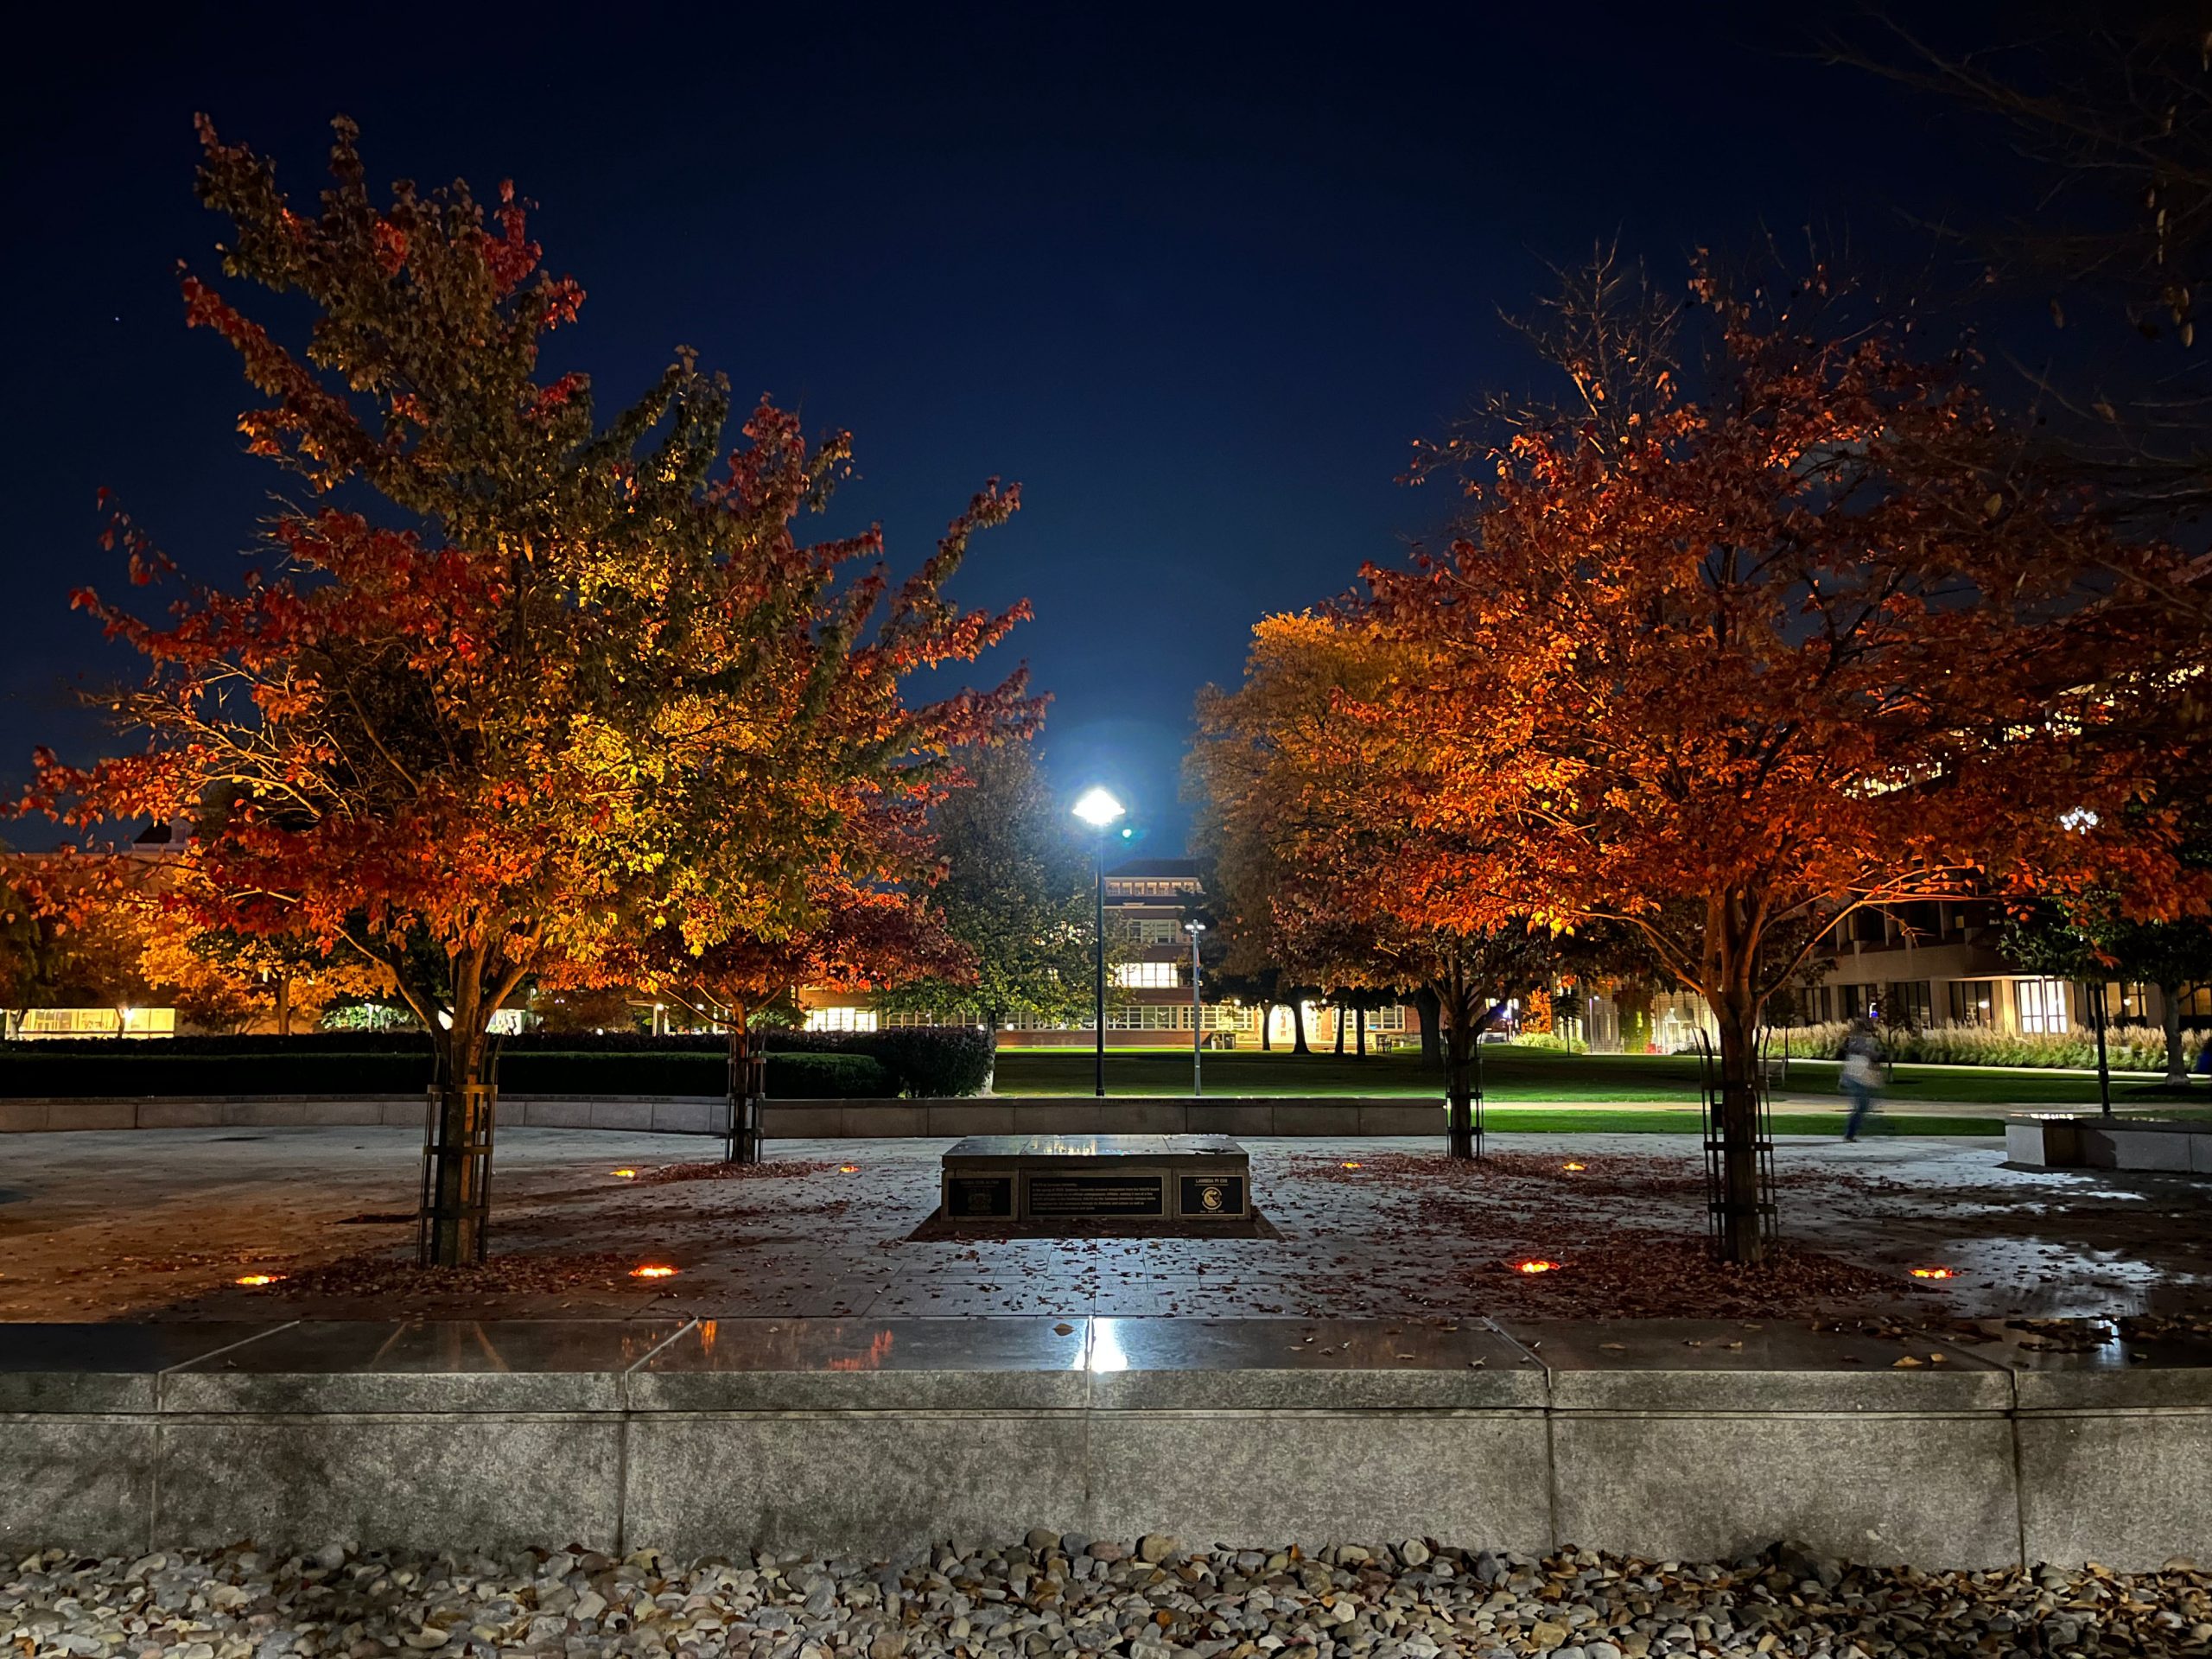 Colorful fall trees lit up with uplighting at night on the Quad